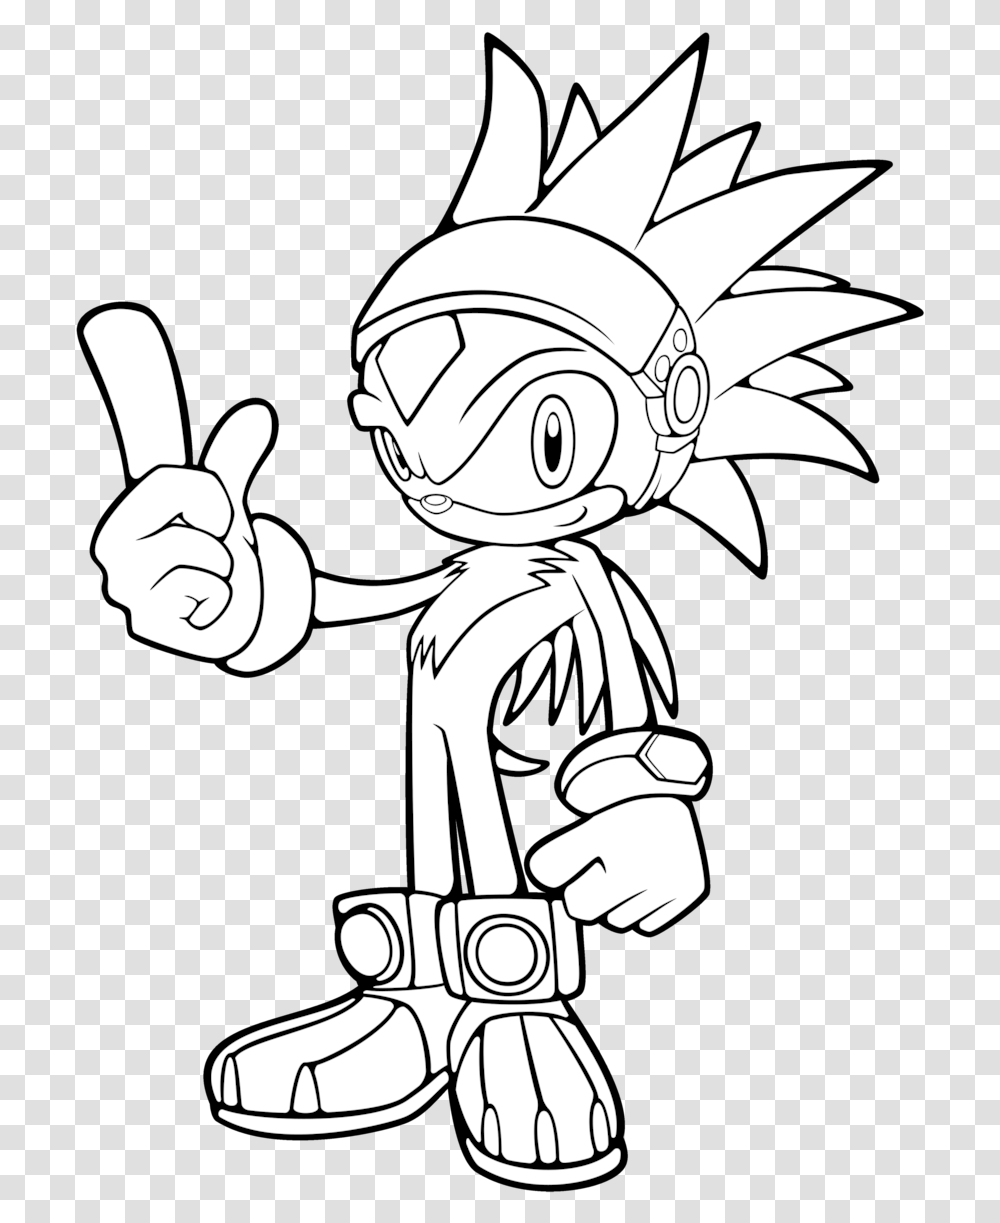 Download Hd Odd Silver The Hedgehog Coloring Pages Bird Sonic The Hedgehog Coloring Pages Transparent Png